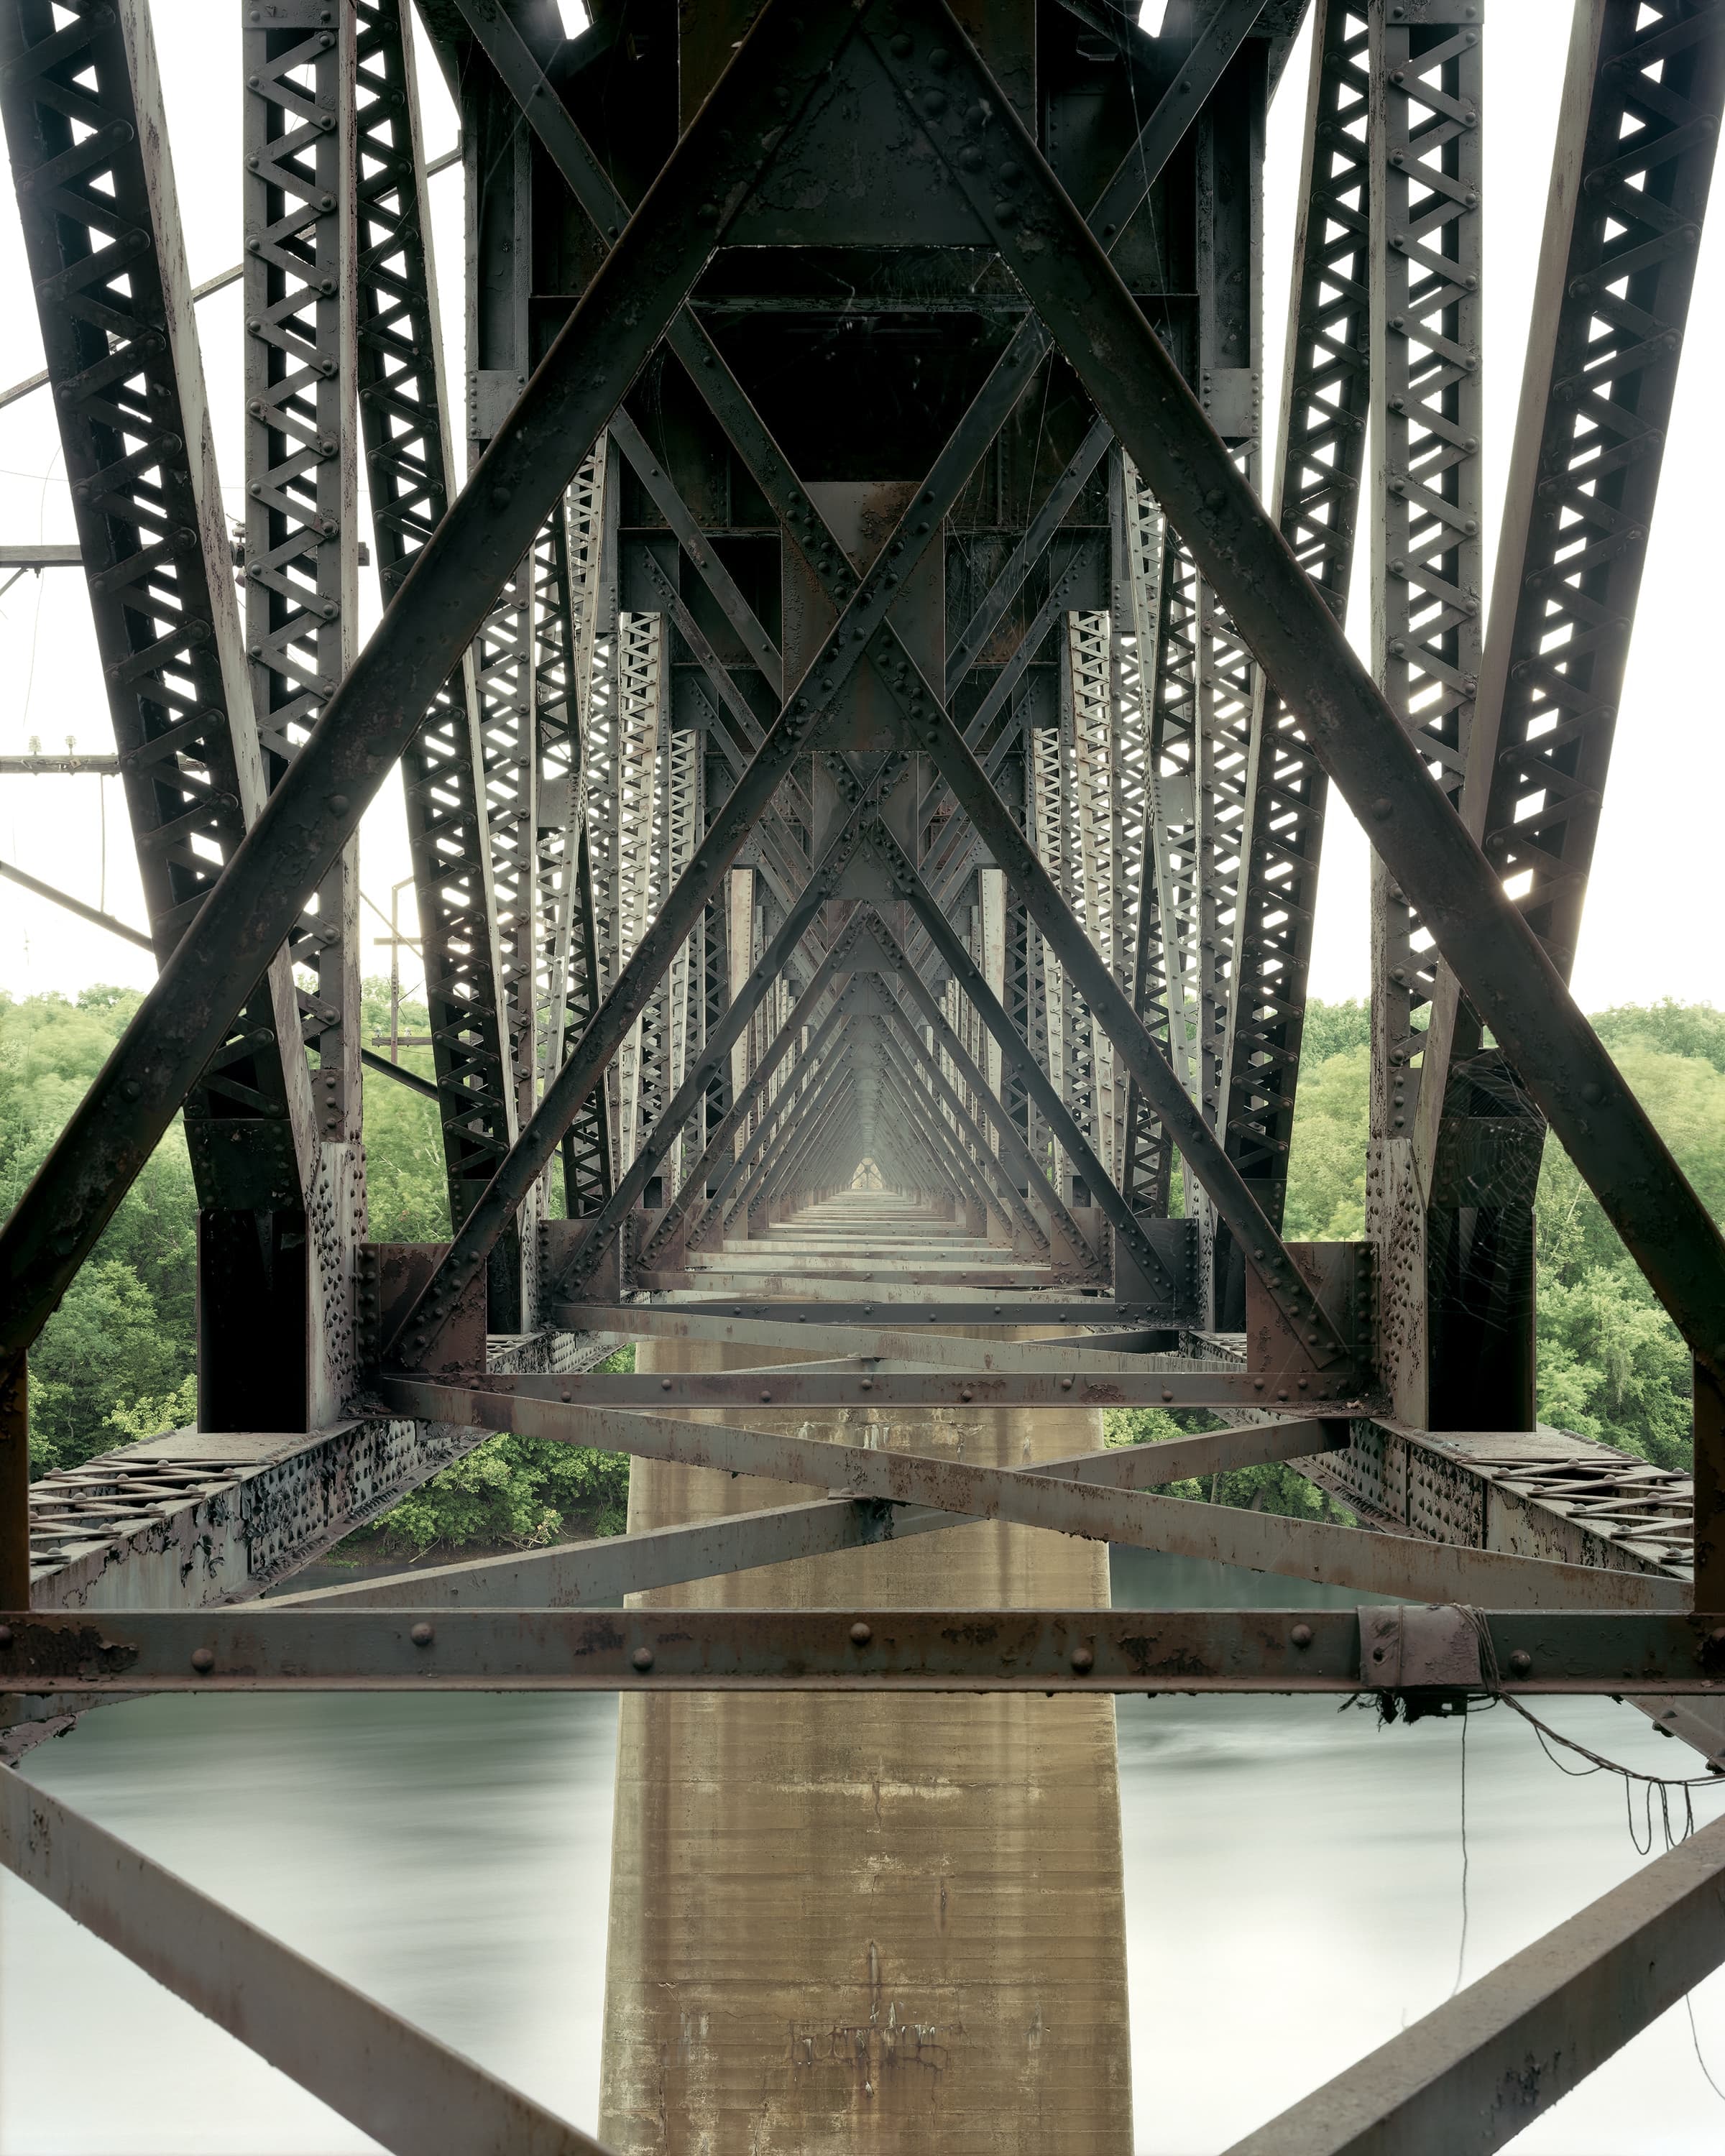 Under the deck of a deck truss bridge for Norfolk Southern Railway crossing the Potomac River.